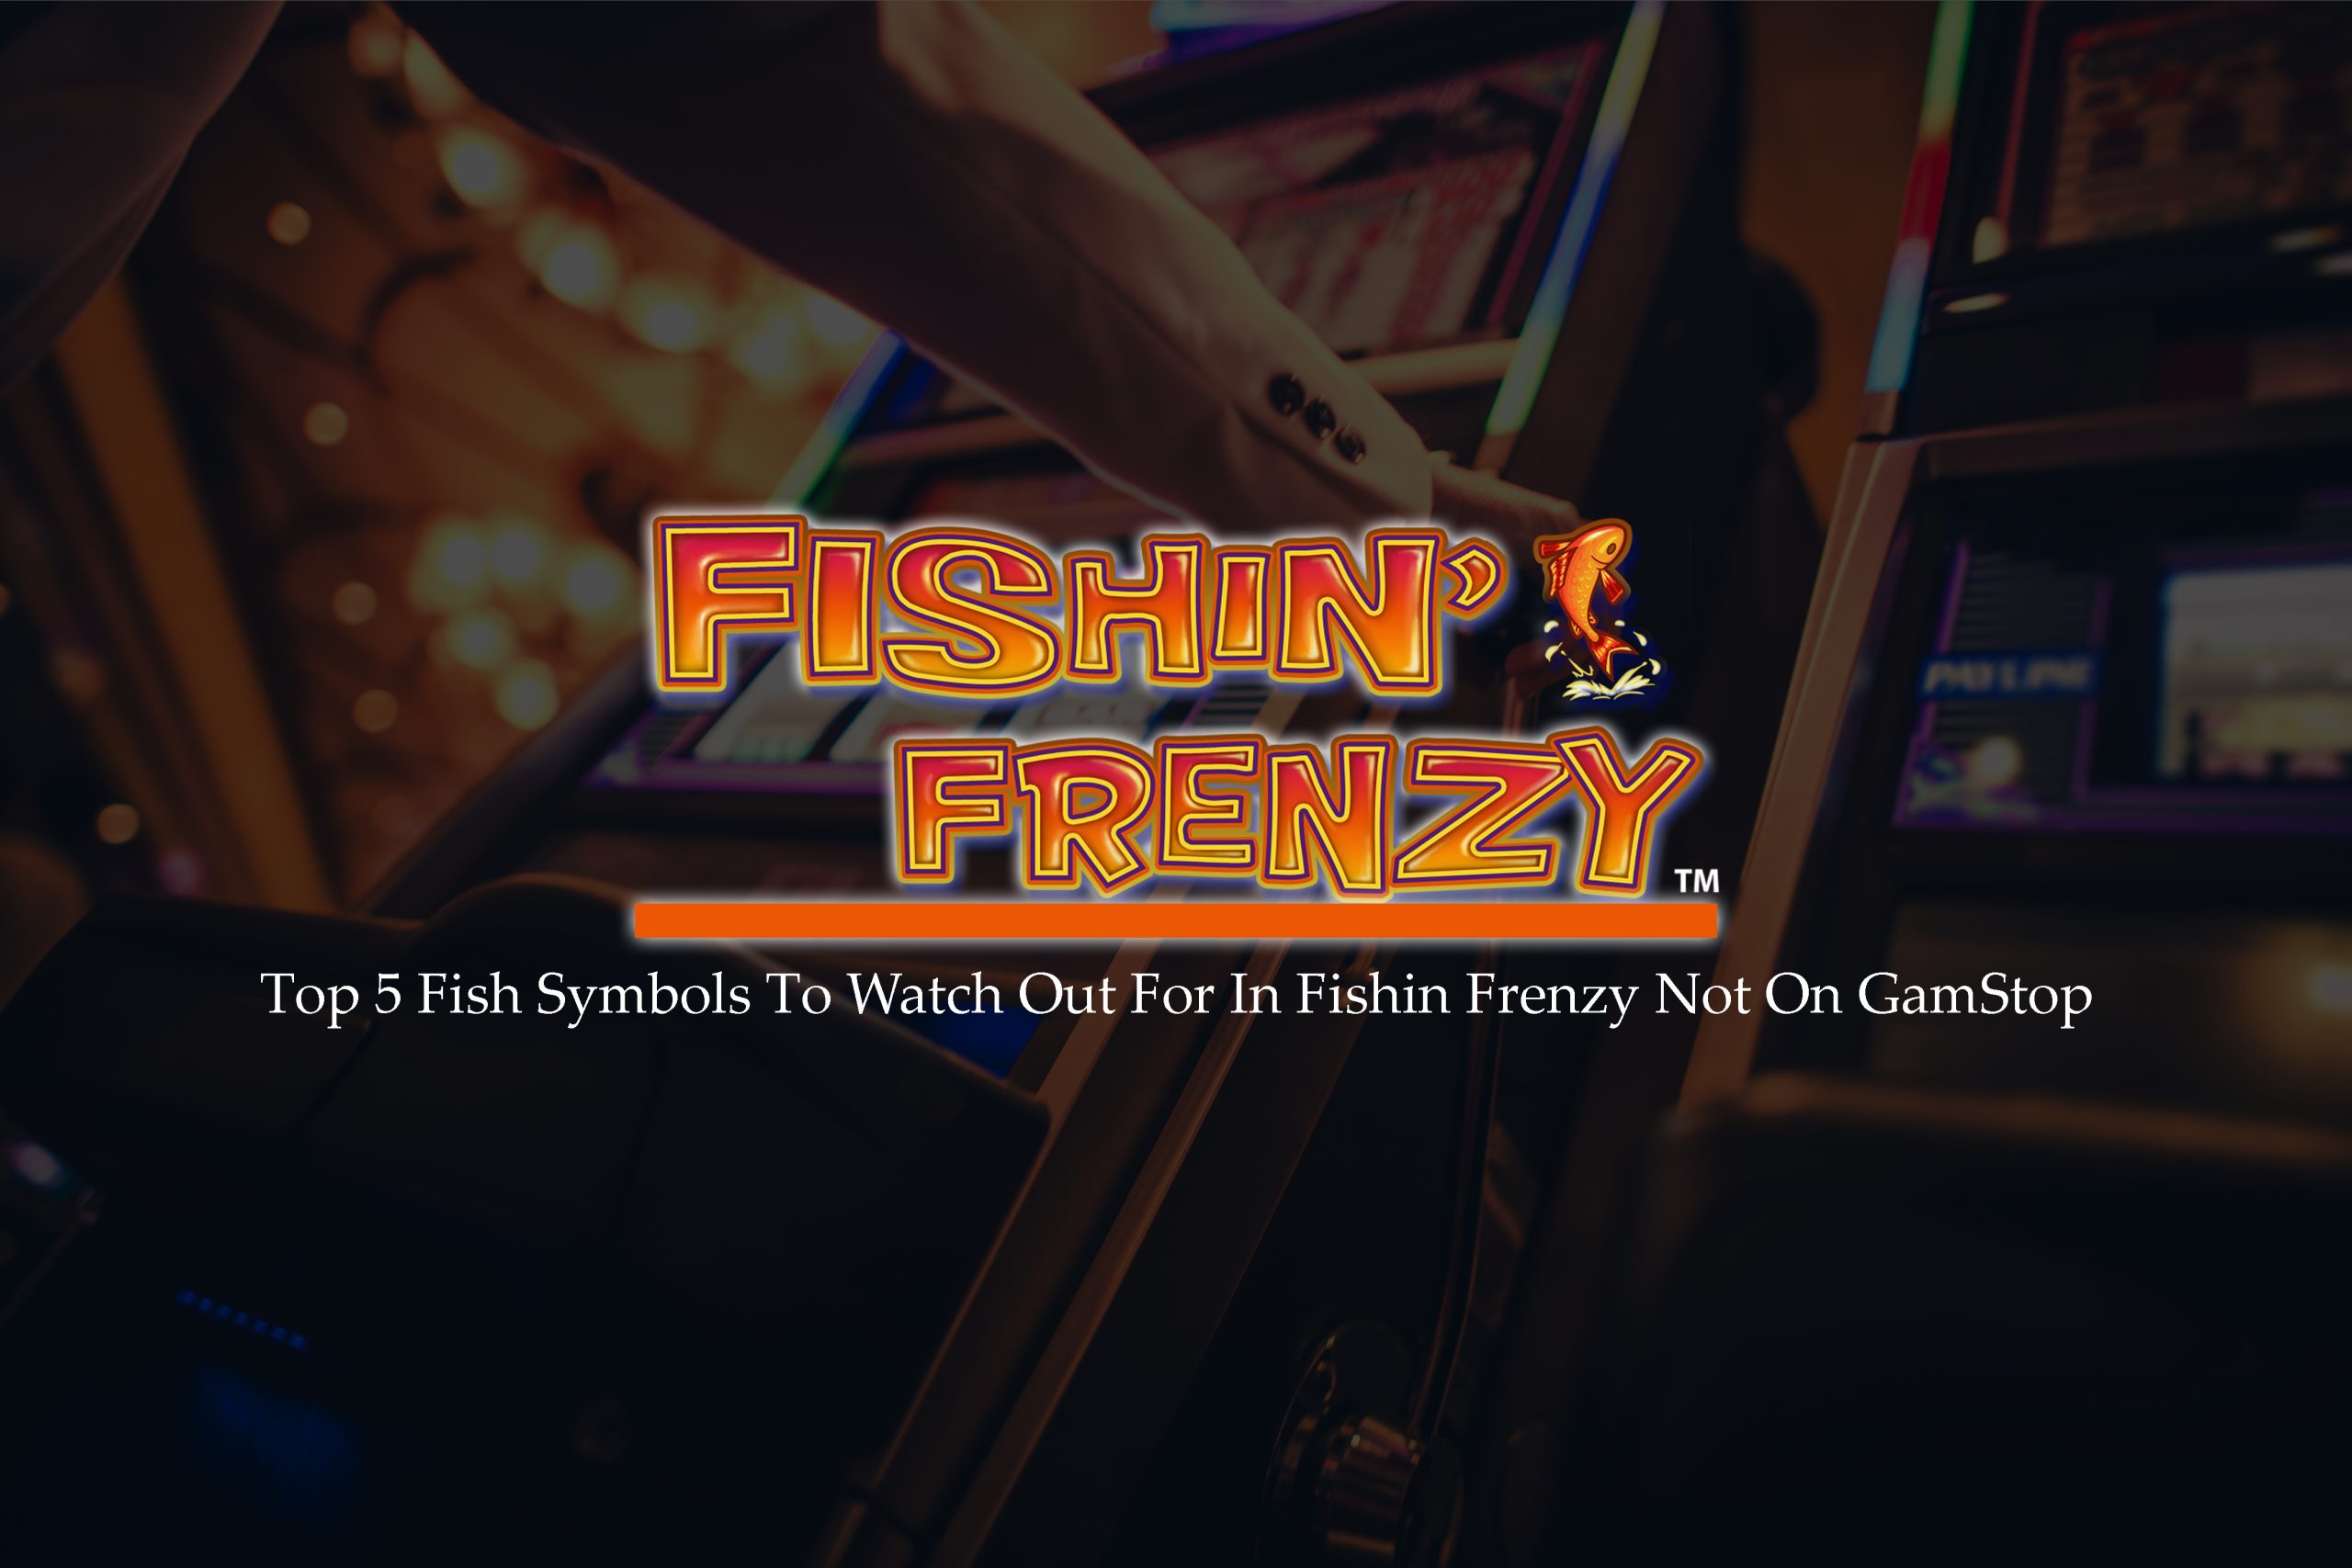 Top 5 Fish Symbols To Watch Out For In Fishin Frenzy Not On GamStop